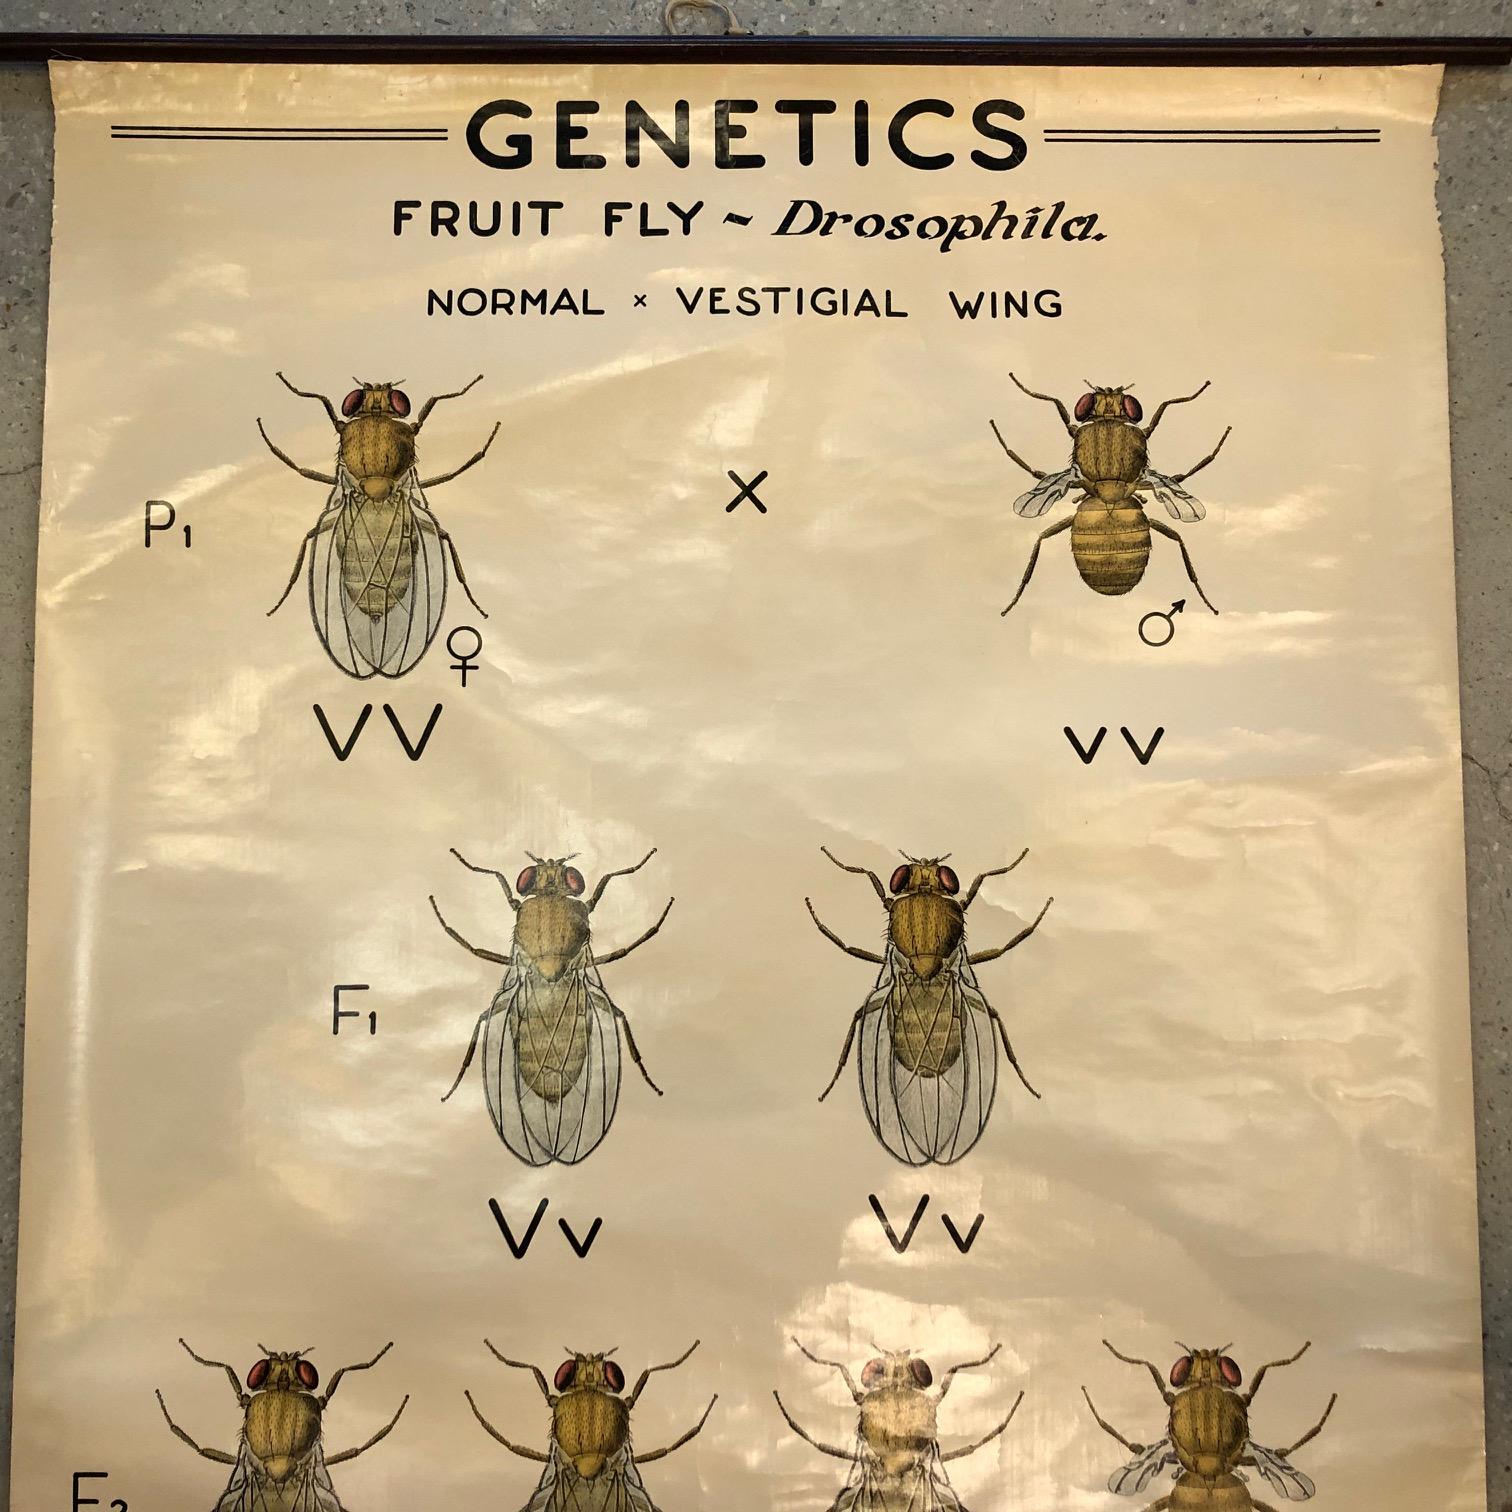 Industrial Educational Zoological Fruit Fly Genetics Chart by The Welch Scientific Company